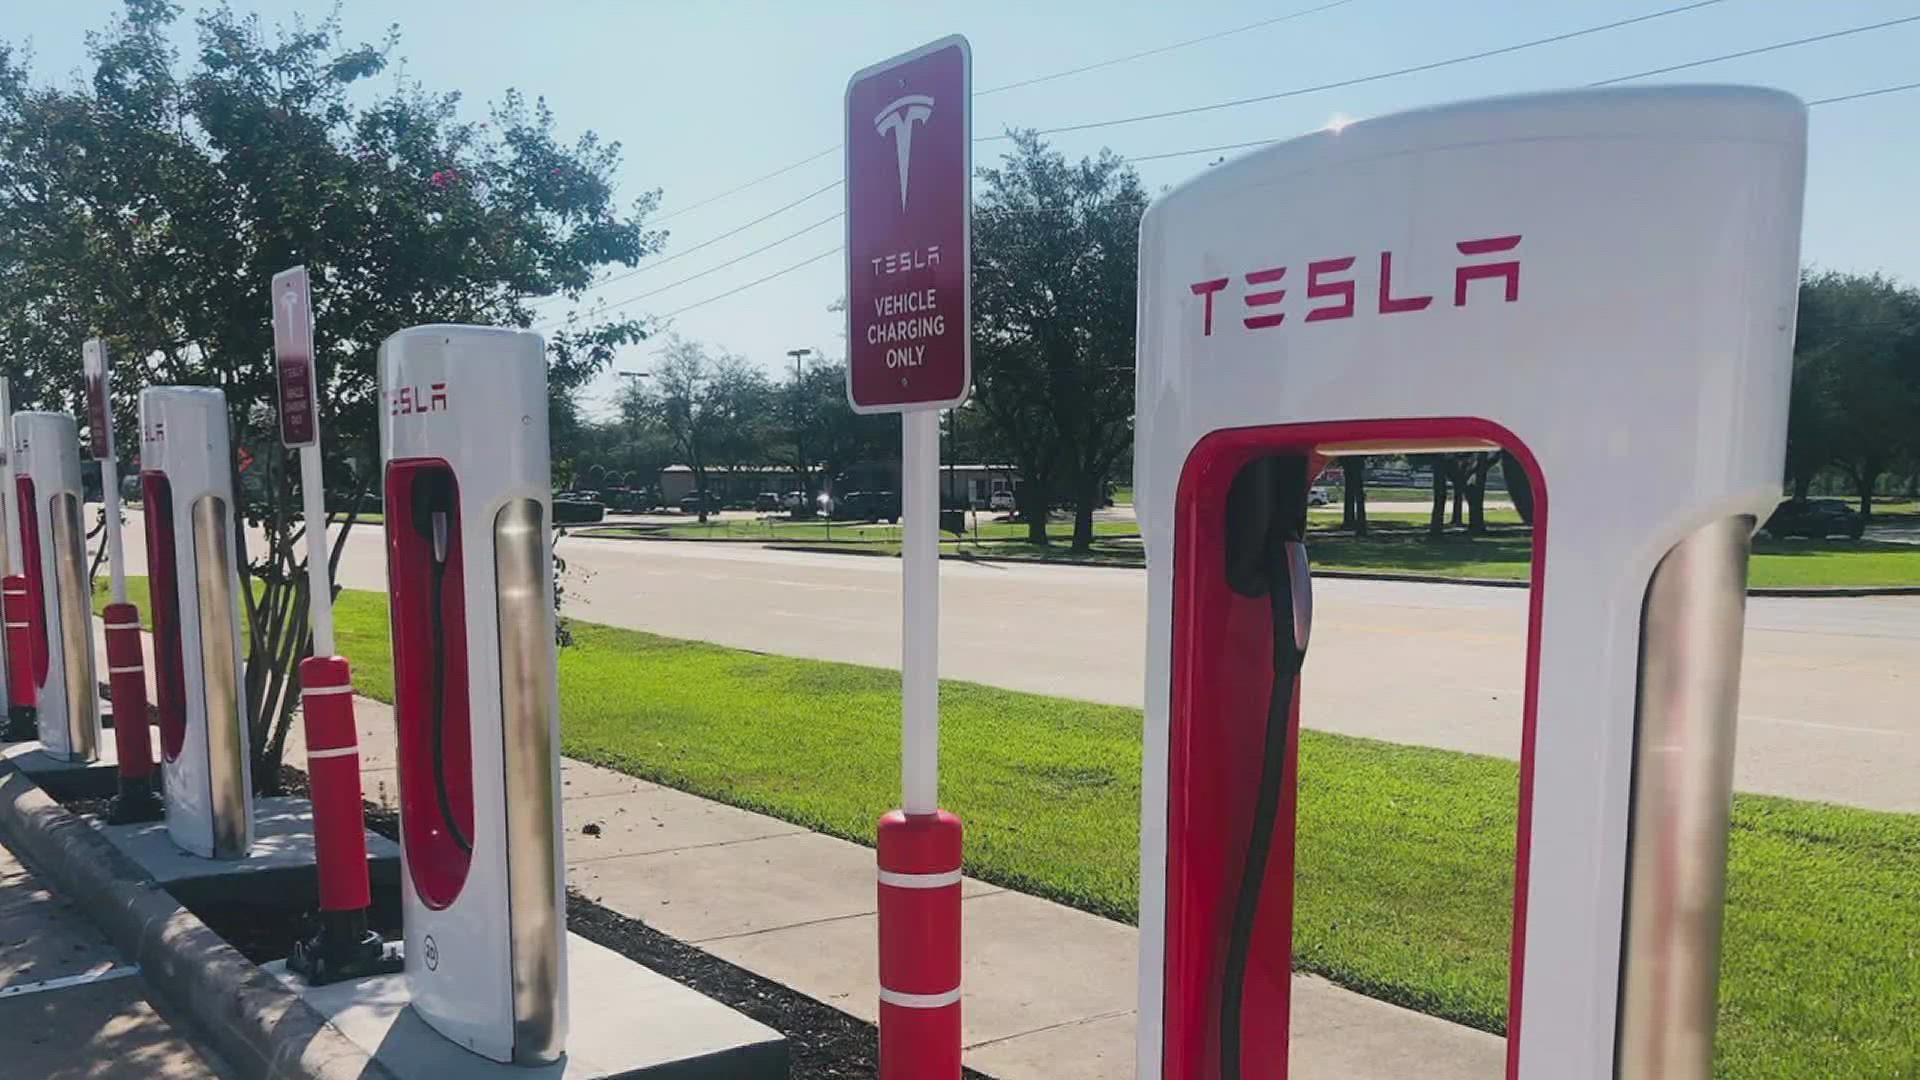 There are 12 superchargers at the station, which are available 24/7 for up to 250 kilowatts. Superchargers can add up to 200 miles of range in just 15 minutes.